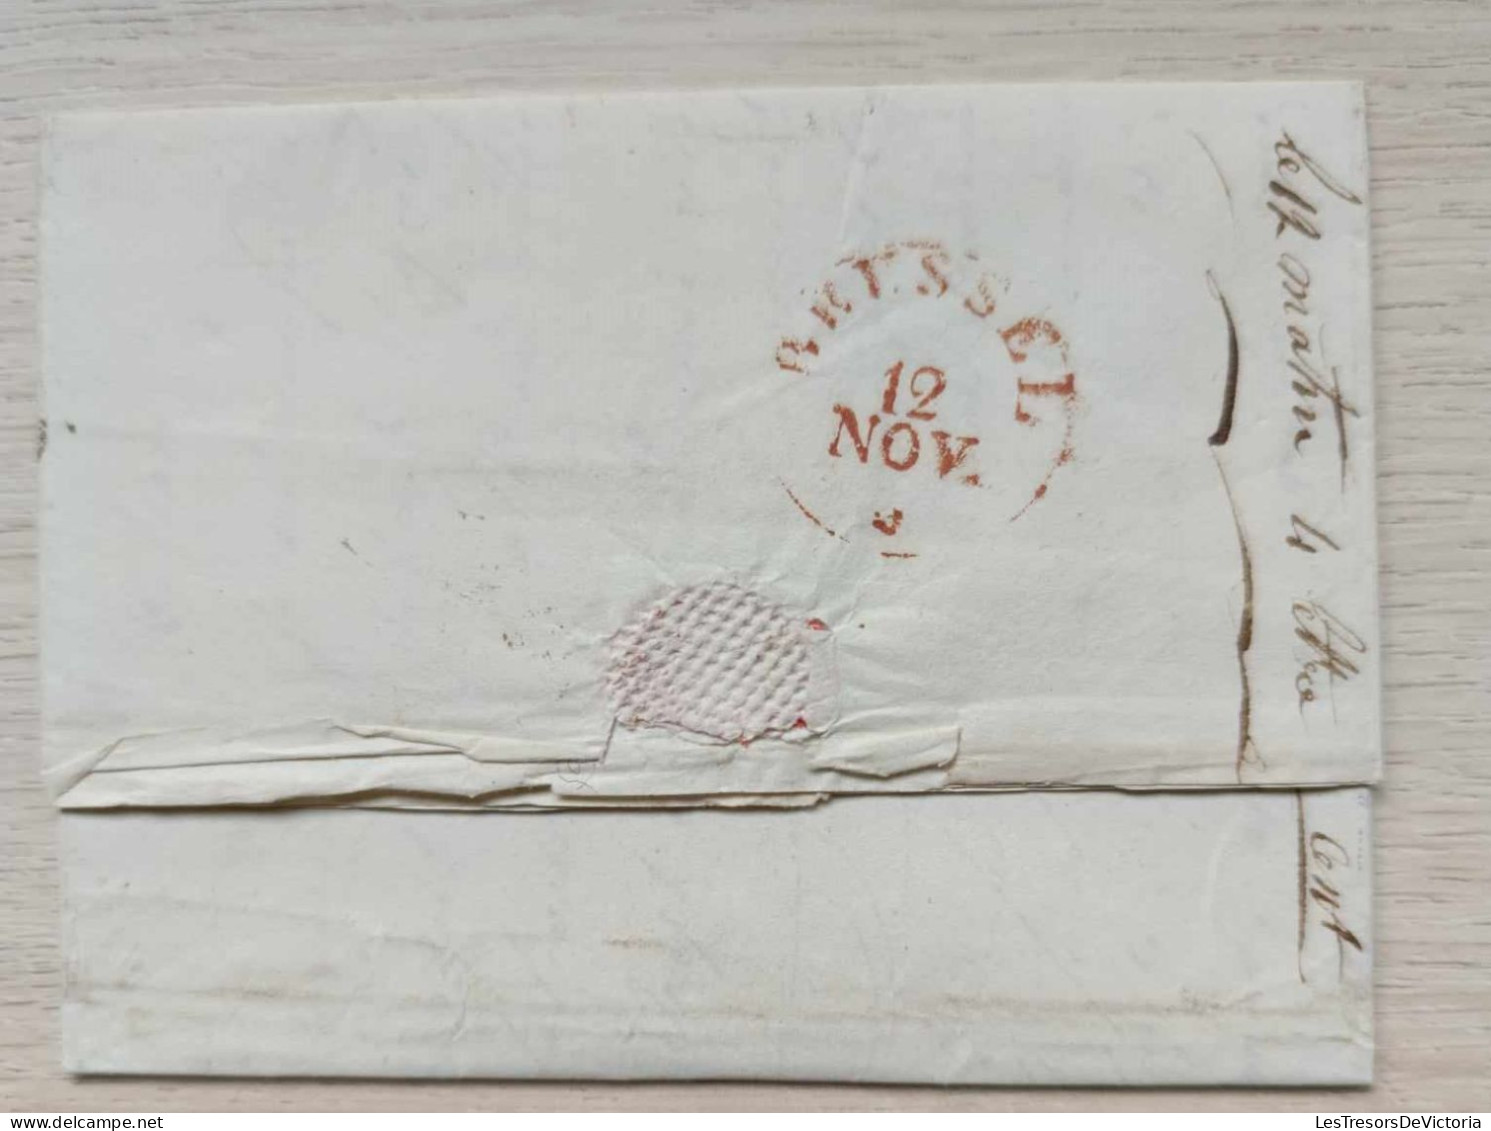 Belgique - Letter From Verviers Mailed On November 21st 1829 To Brussels - Weight 16ws Wigtjes - 1815-1830 (Periodo Holandes)